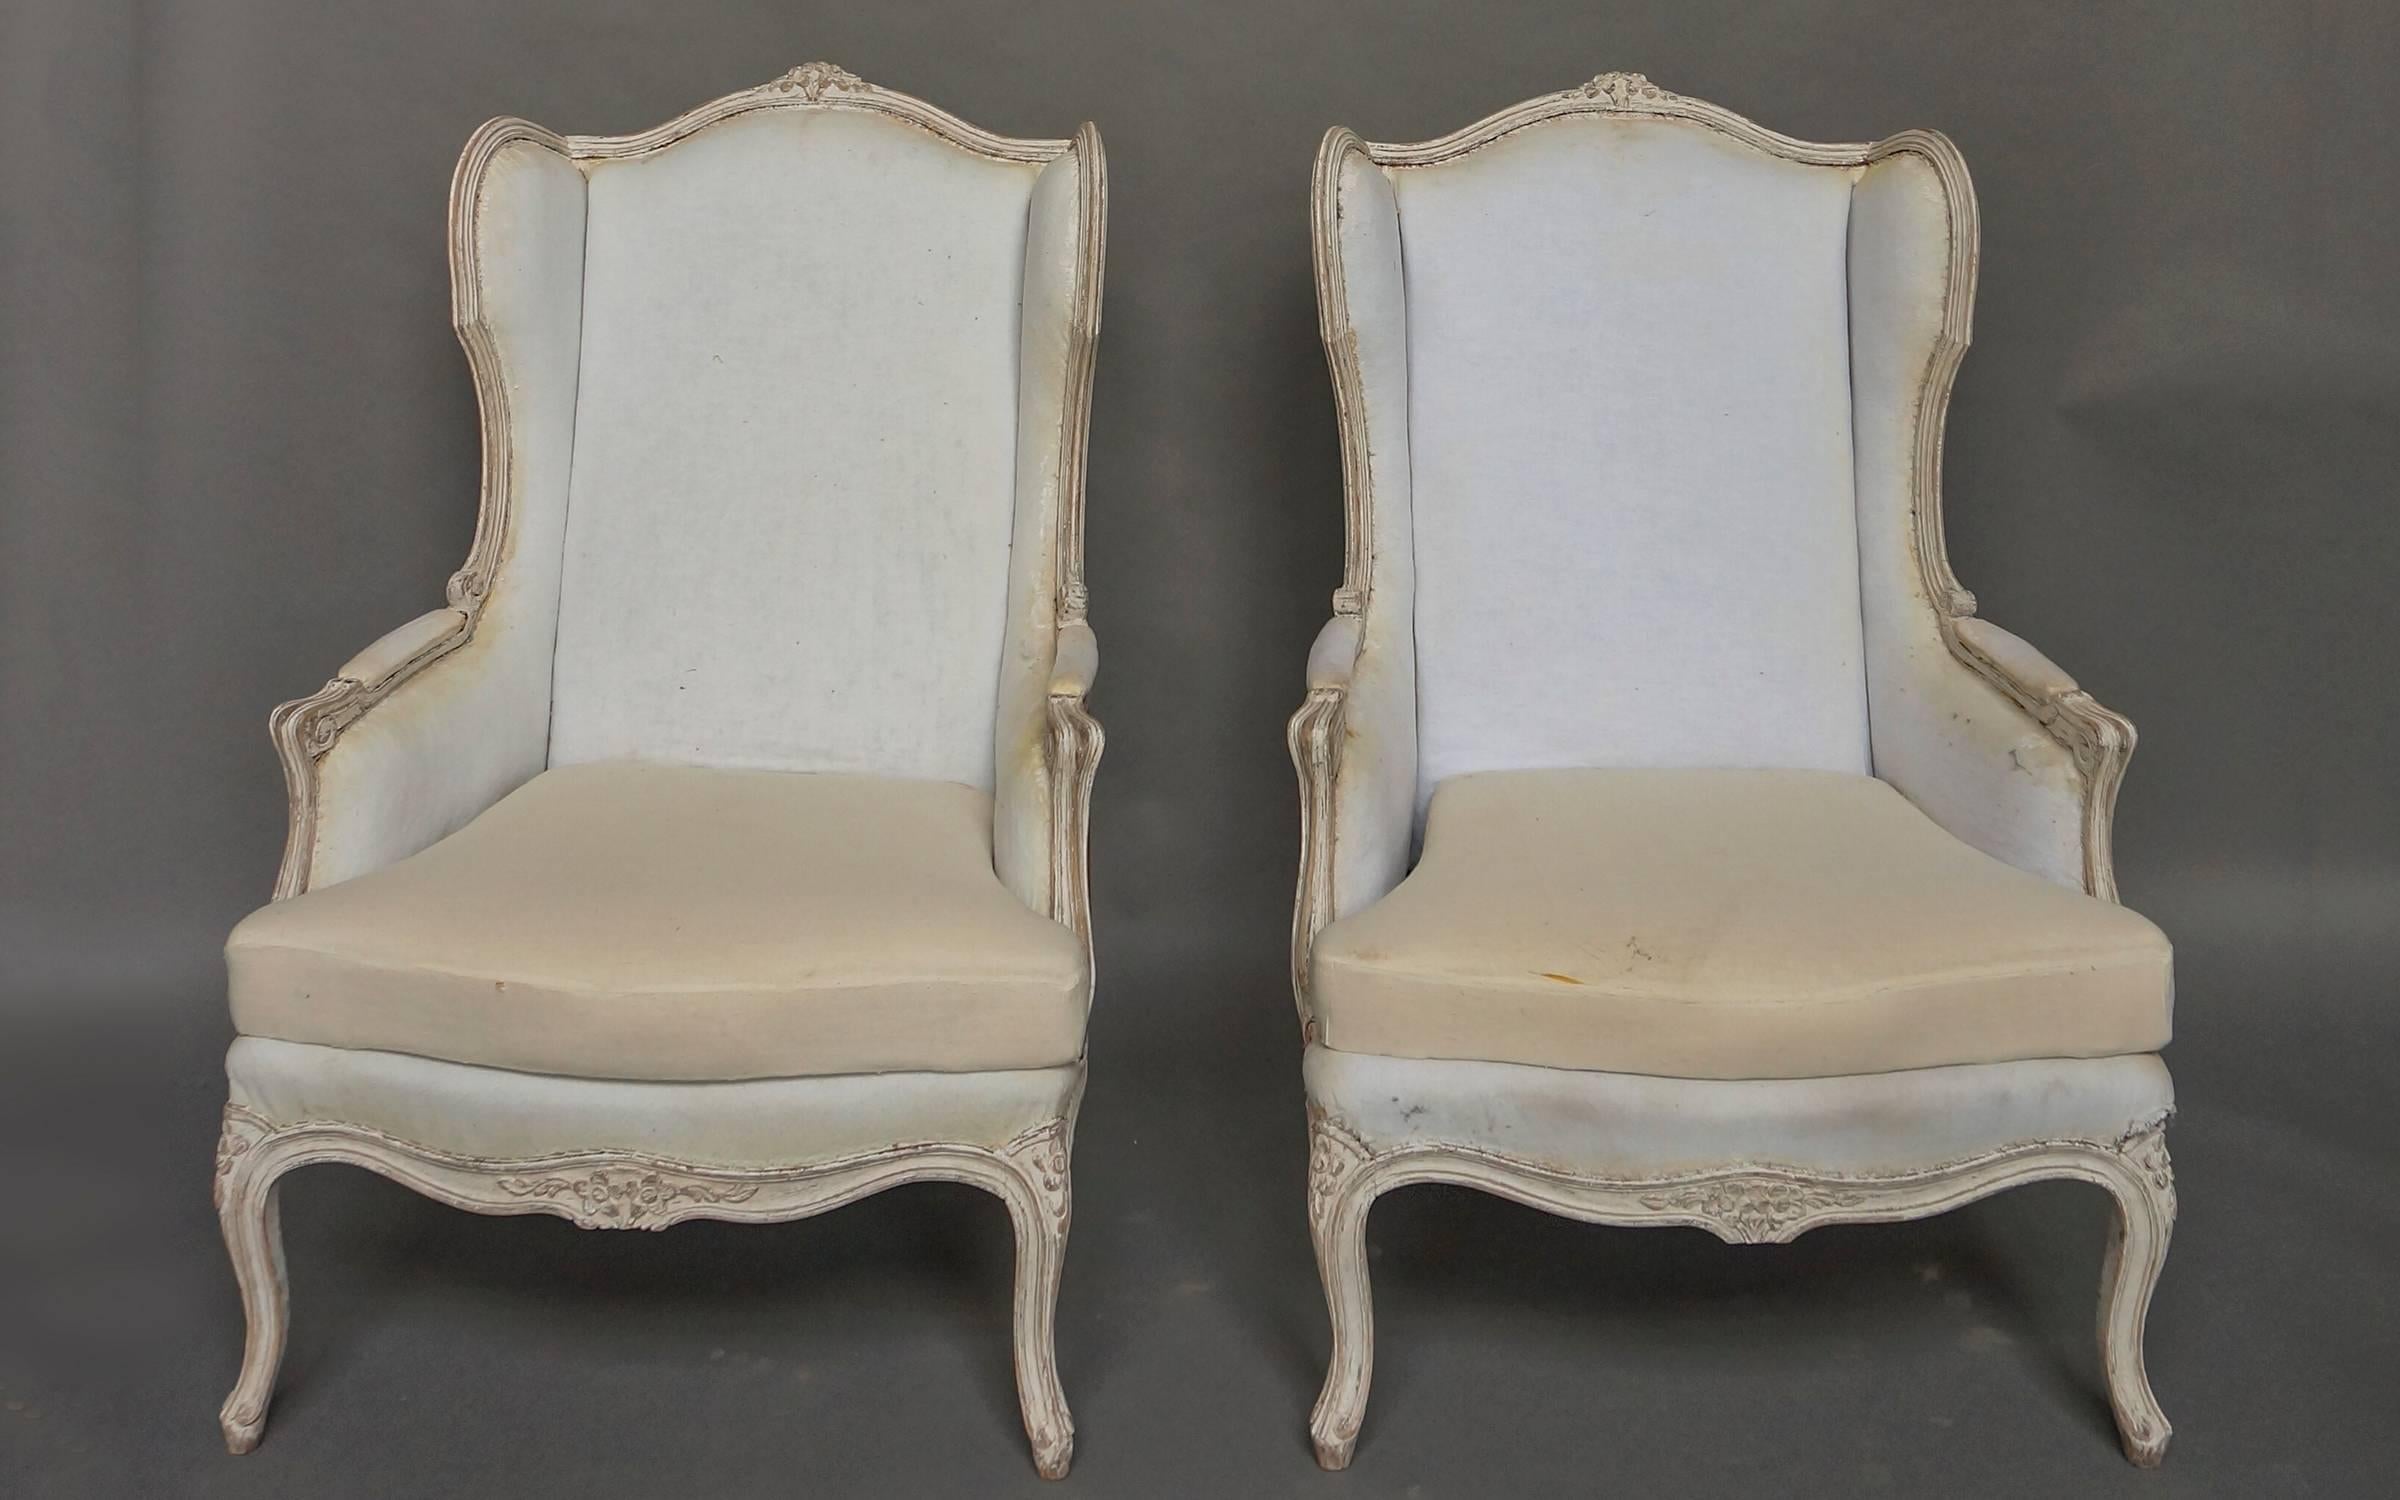 Pair of roomy wing-back chairs, Sweden circa 1910, in the Gustavian style. The exposed wooden frame is carved with roses at the top, on the apron, and on the “knees” of the cabriole legs. Very Swedish indeed.